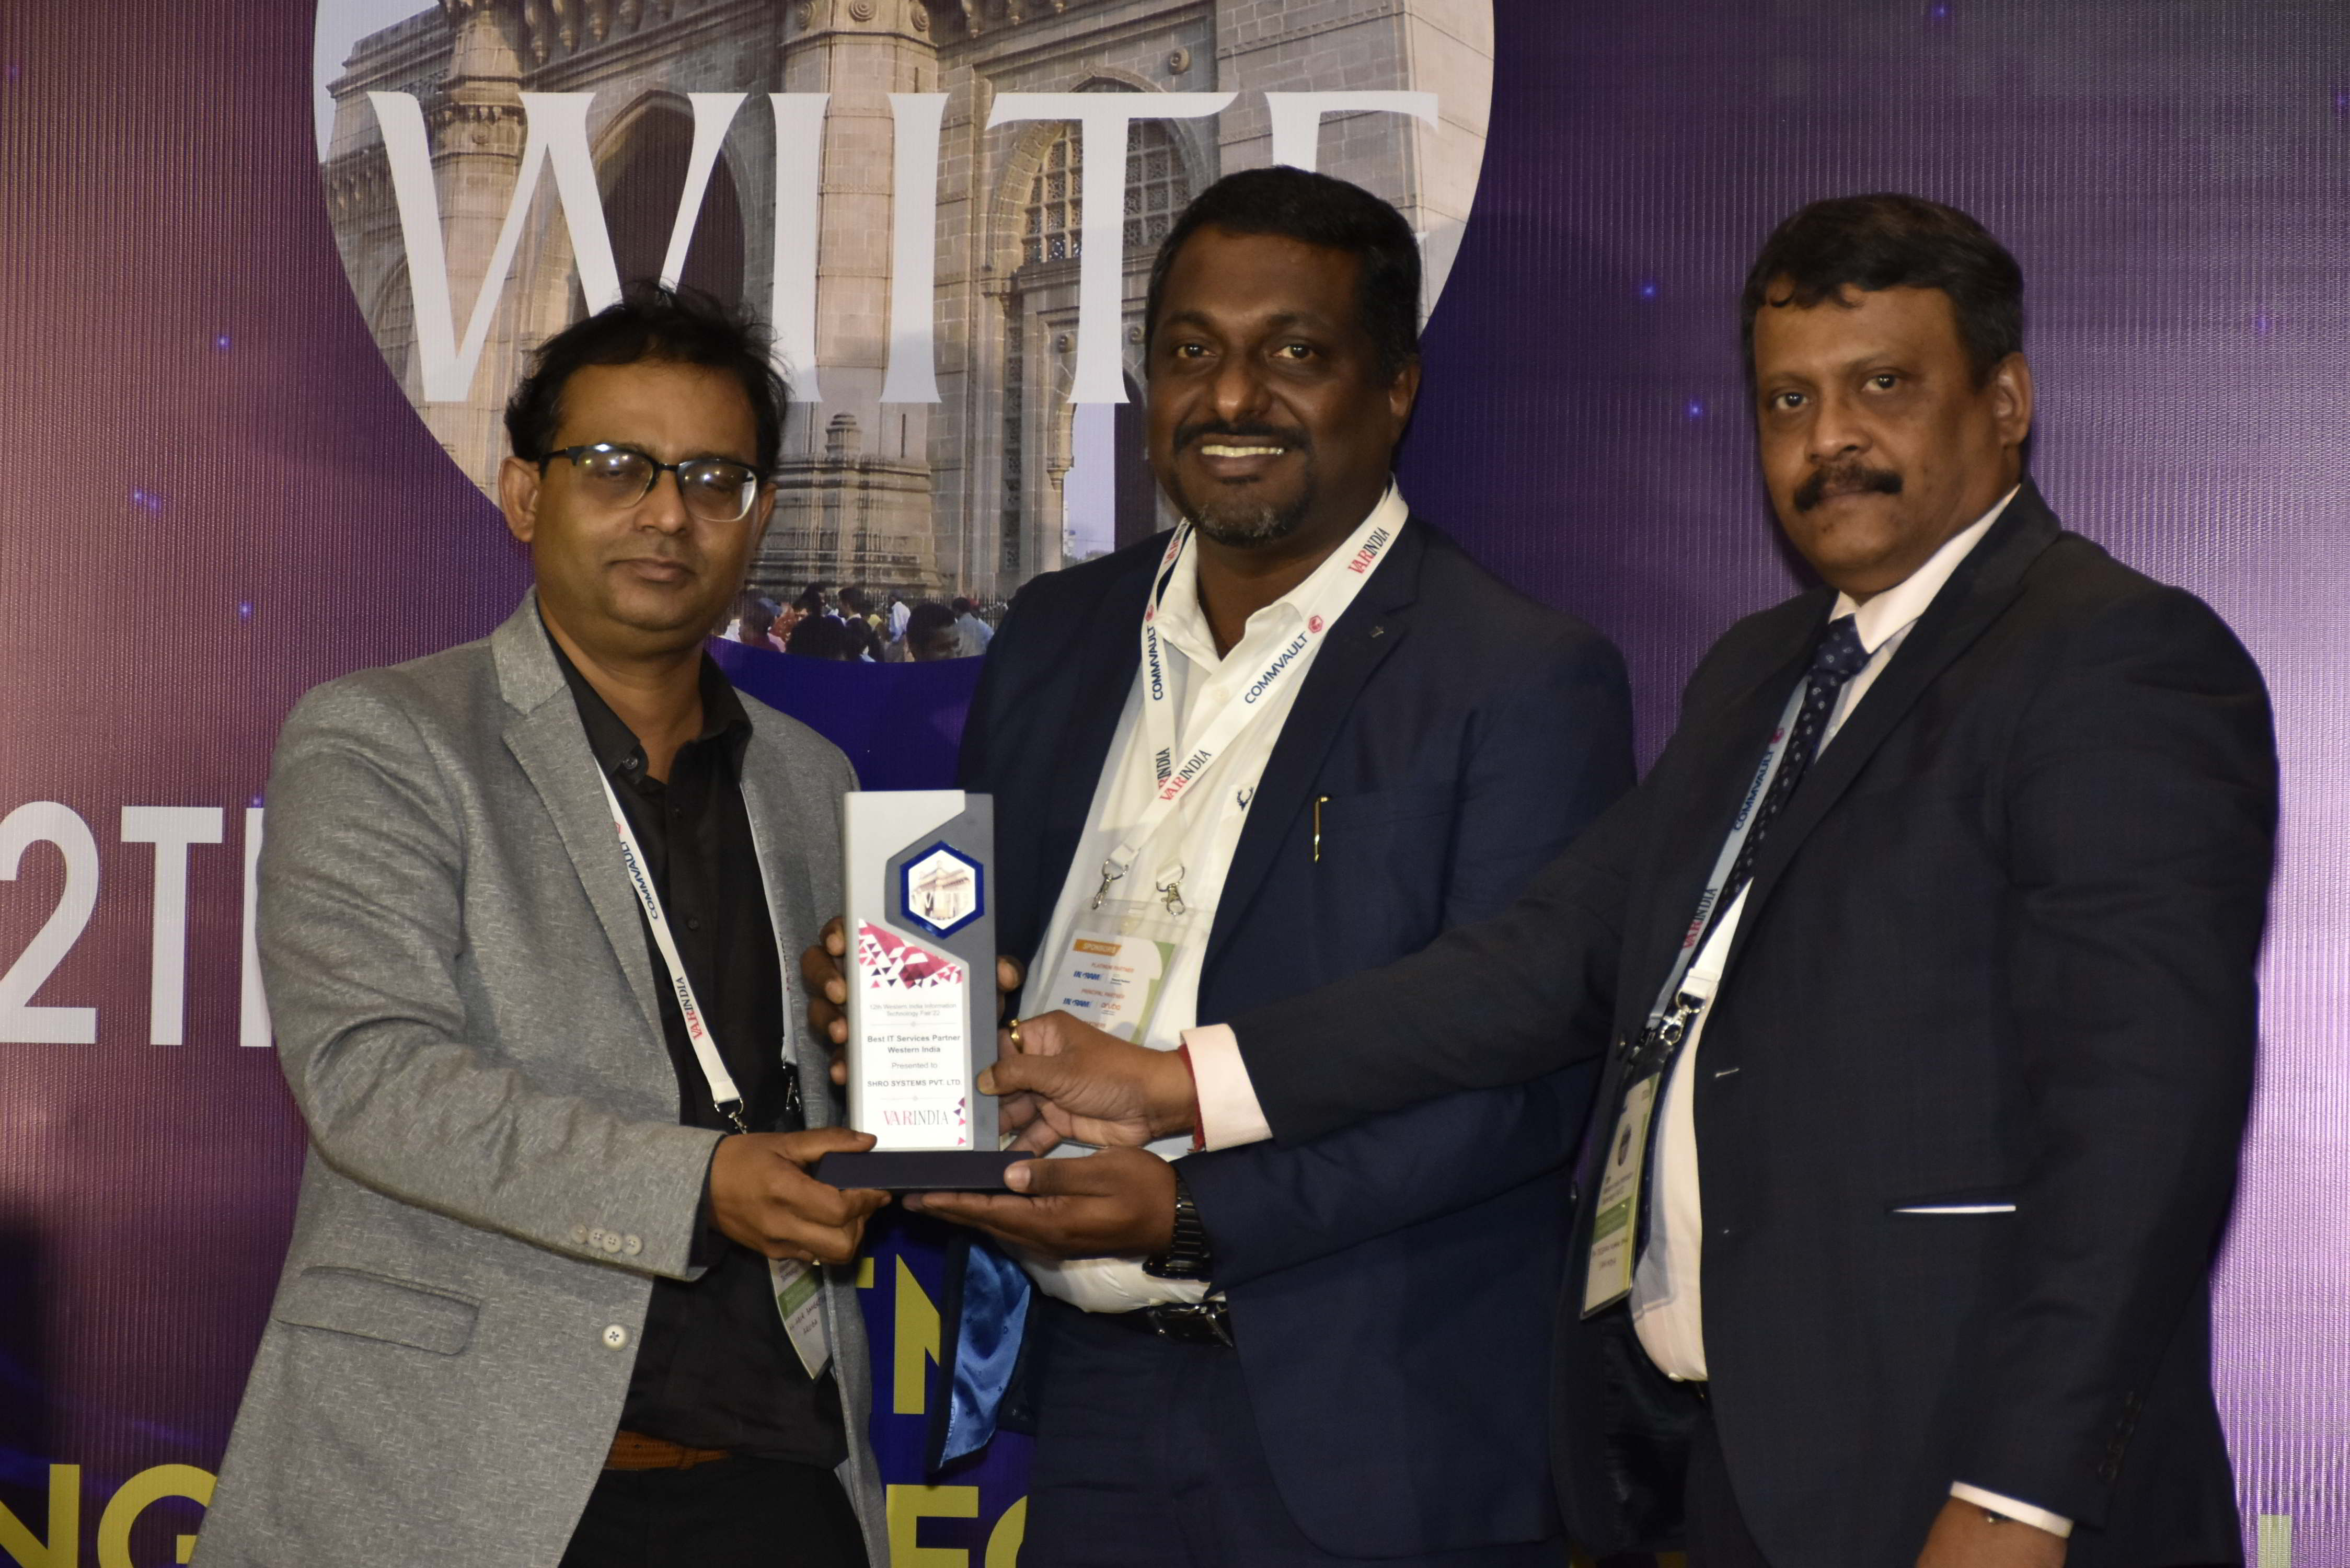 The Best IT Services Partner Western India- was bagged by SHRO Systems Pvt. Ltd.